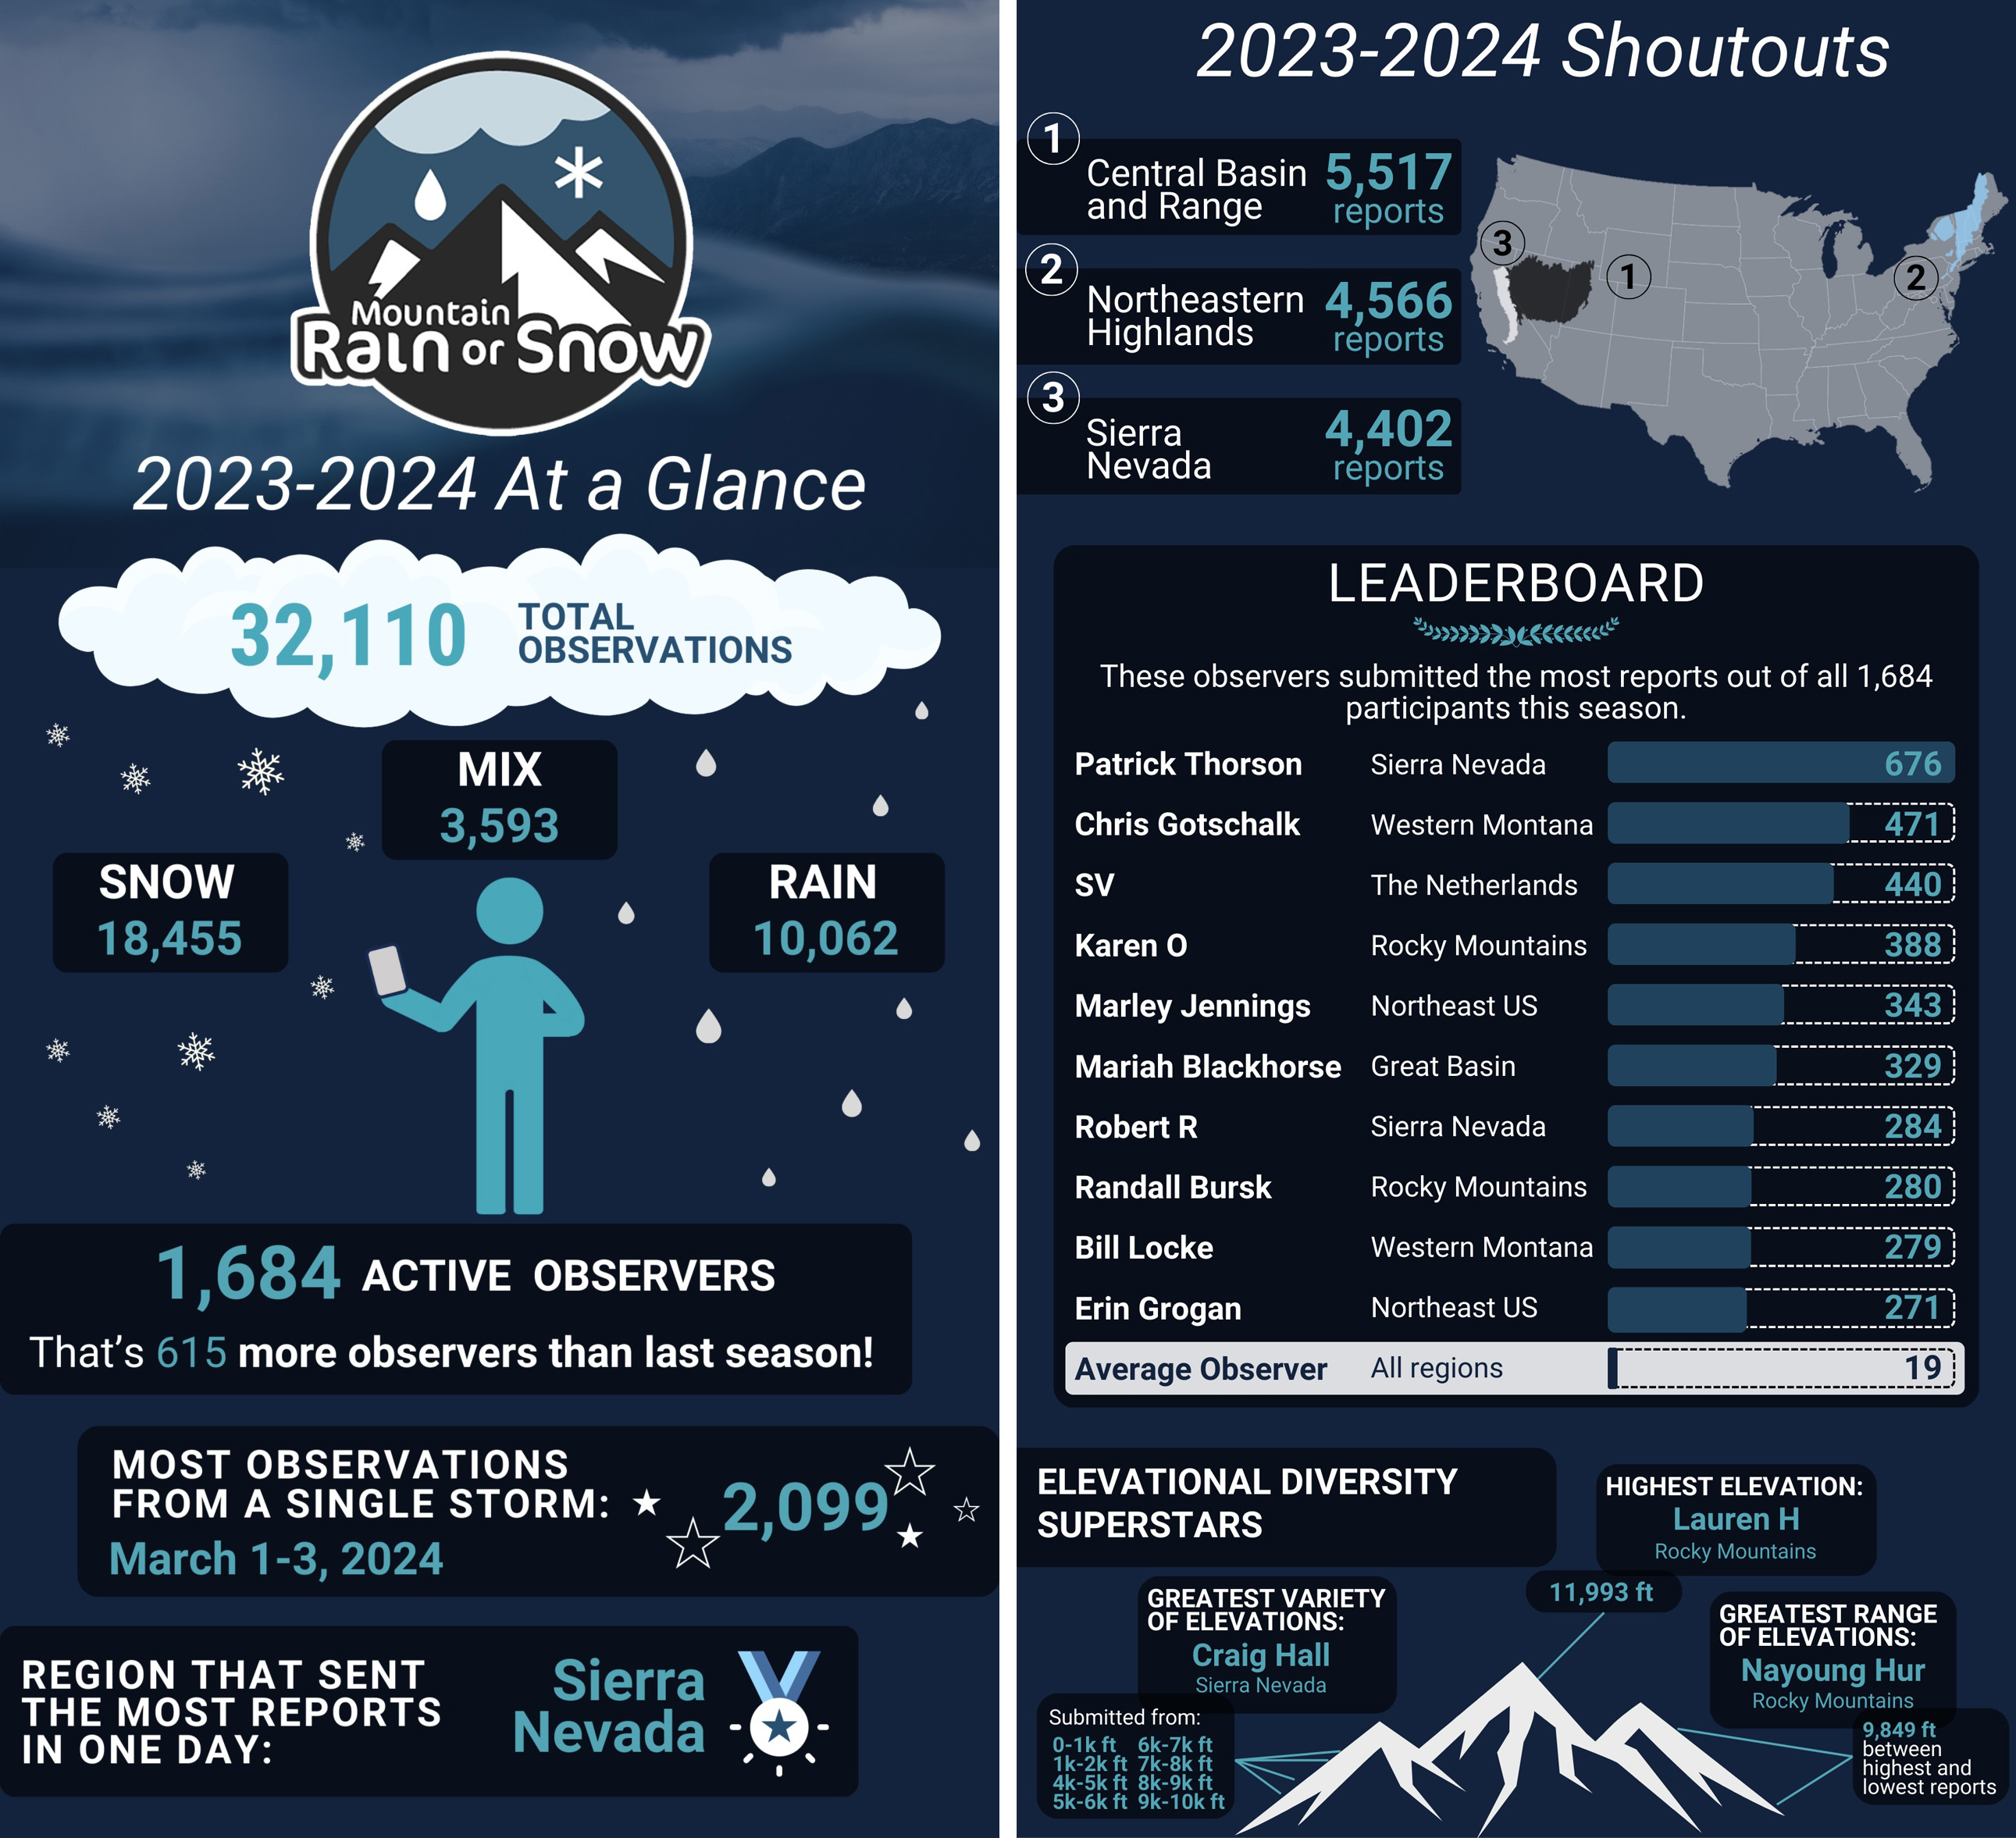 ### Descriptive 508 Compliant Alt Text: This infographic provides an overview of the 2023-2024 Mountain Rain or Snow observation season. **Left Side: 2023-2024 At a Glance** - Total Observations: 32,110 - Snow: 18,455 - Mix (rain and snow): 3,593 - Rain: 10,062 - There were 1,684 active observers, which is 615 more than last season. - The most observations from a single storm were 2,099 from March 1-3, 2024. - The region that sent the most reports in one day was Sierra Nevada. **Right Side: 2023-2024 Shoutouts** - Top Regions by Reports: 1. Central Basin and Range: 5,517 reports 2. Northeastern Highlands: 4,566 reports 3. Sierra Nevada: 4,402 reports - Leaderboard of Observers: 1. Patrick Thorson, Sierra Nevada: 676 reports 2. Chris Gotschalk, Western Montana: 471 reports 3. SV, The Netherlands: 440 reports 4. Karen O, Rocky Mountains: 388 reports 5. Marley Jennings, Northeast US: 343 reports 6. Mariah Blackhorse, Great Basin: 329 reports 7. Robert R, Sierra Nevada: 284 reports 8. Randall Bursk, Rocky Mountains: 280 reports 9. Bill Locke, Western Montana: 279 reports 10. Erin Grogan, Northeast US: 271 reports - Average Observer across all regions: 19 reports **Elevational Diversity Superstars** - Greatest Variety of Elevations: Craig Hall, Sierra Nevada, submitted from various elevation ranges. - Highest Elevation: Lauren H, Rocky Mountains, at 11,993 ft. - Greatest Range of Elevations: Nayoung Hur, Rocky Mountains, with a range of 8,849 ft between highest and lowest reports.